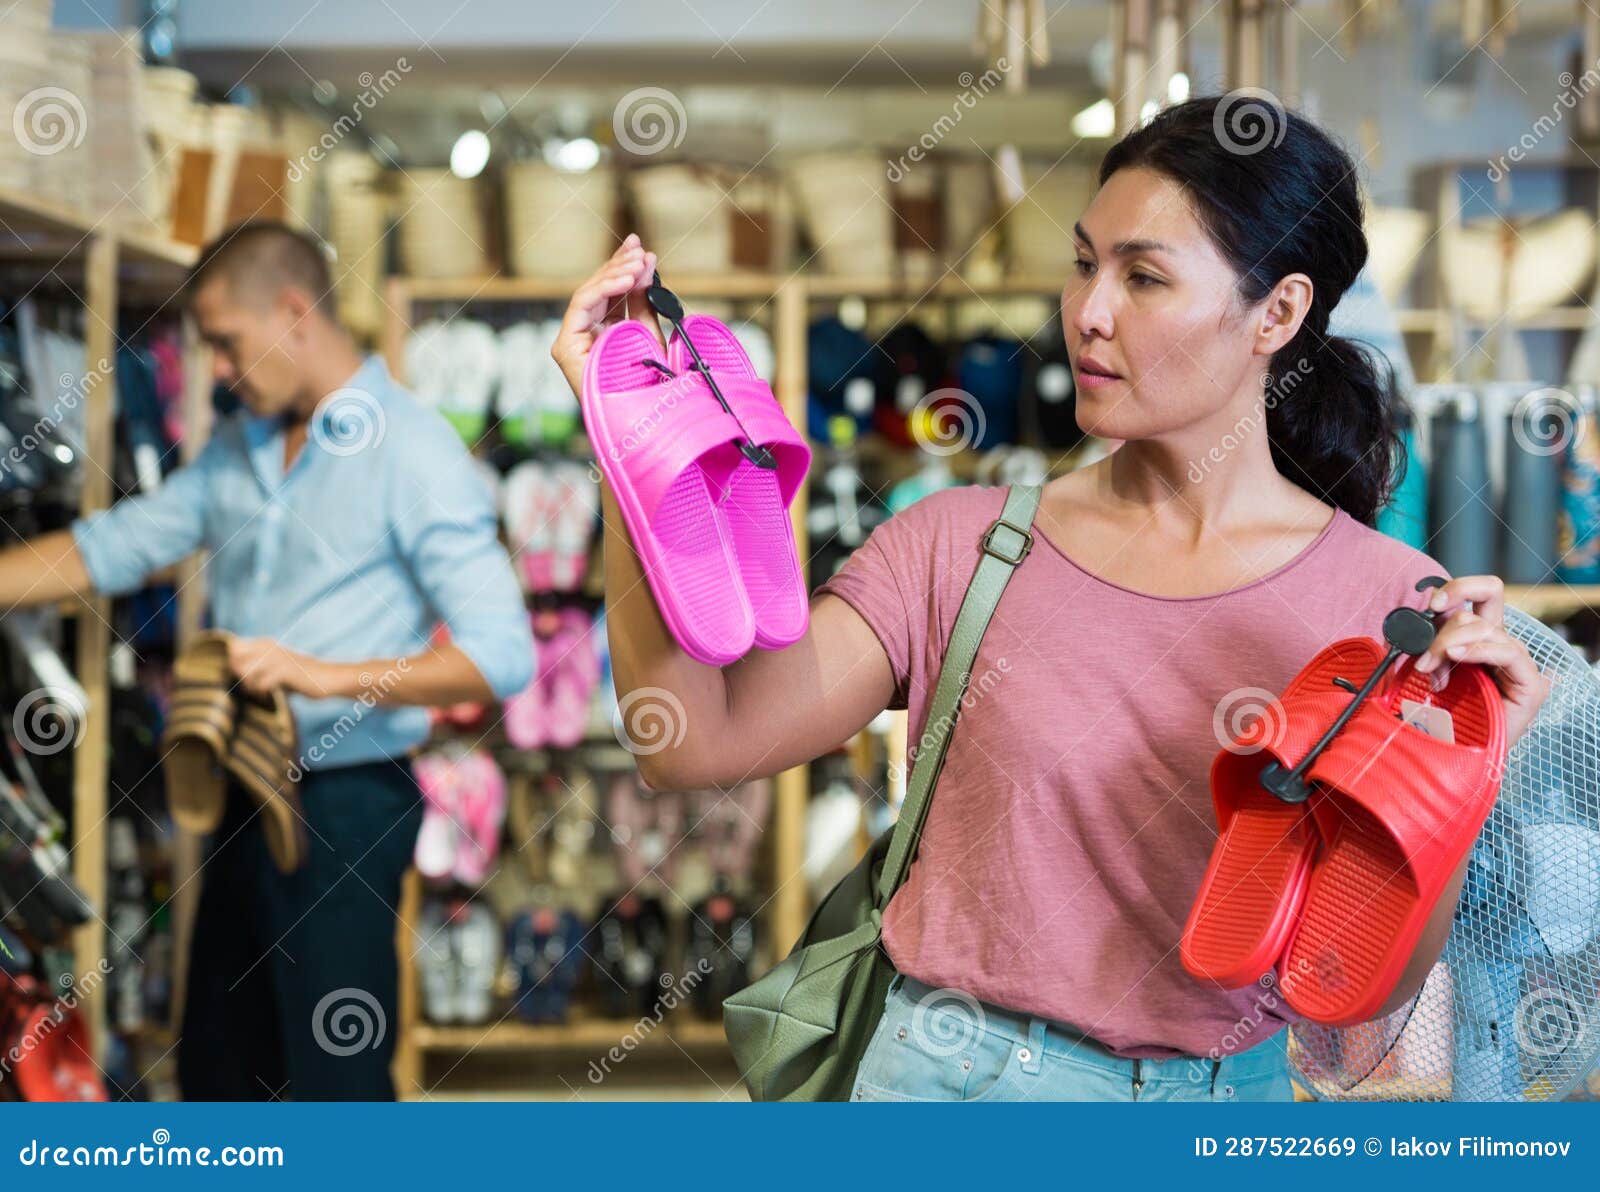 woman with pairs of jandals in store